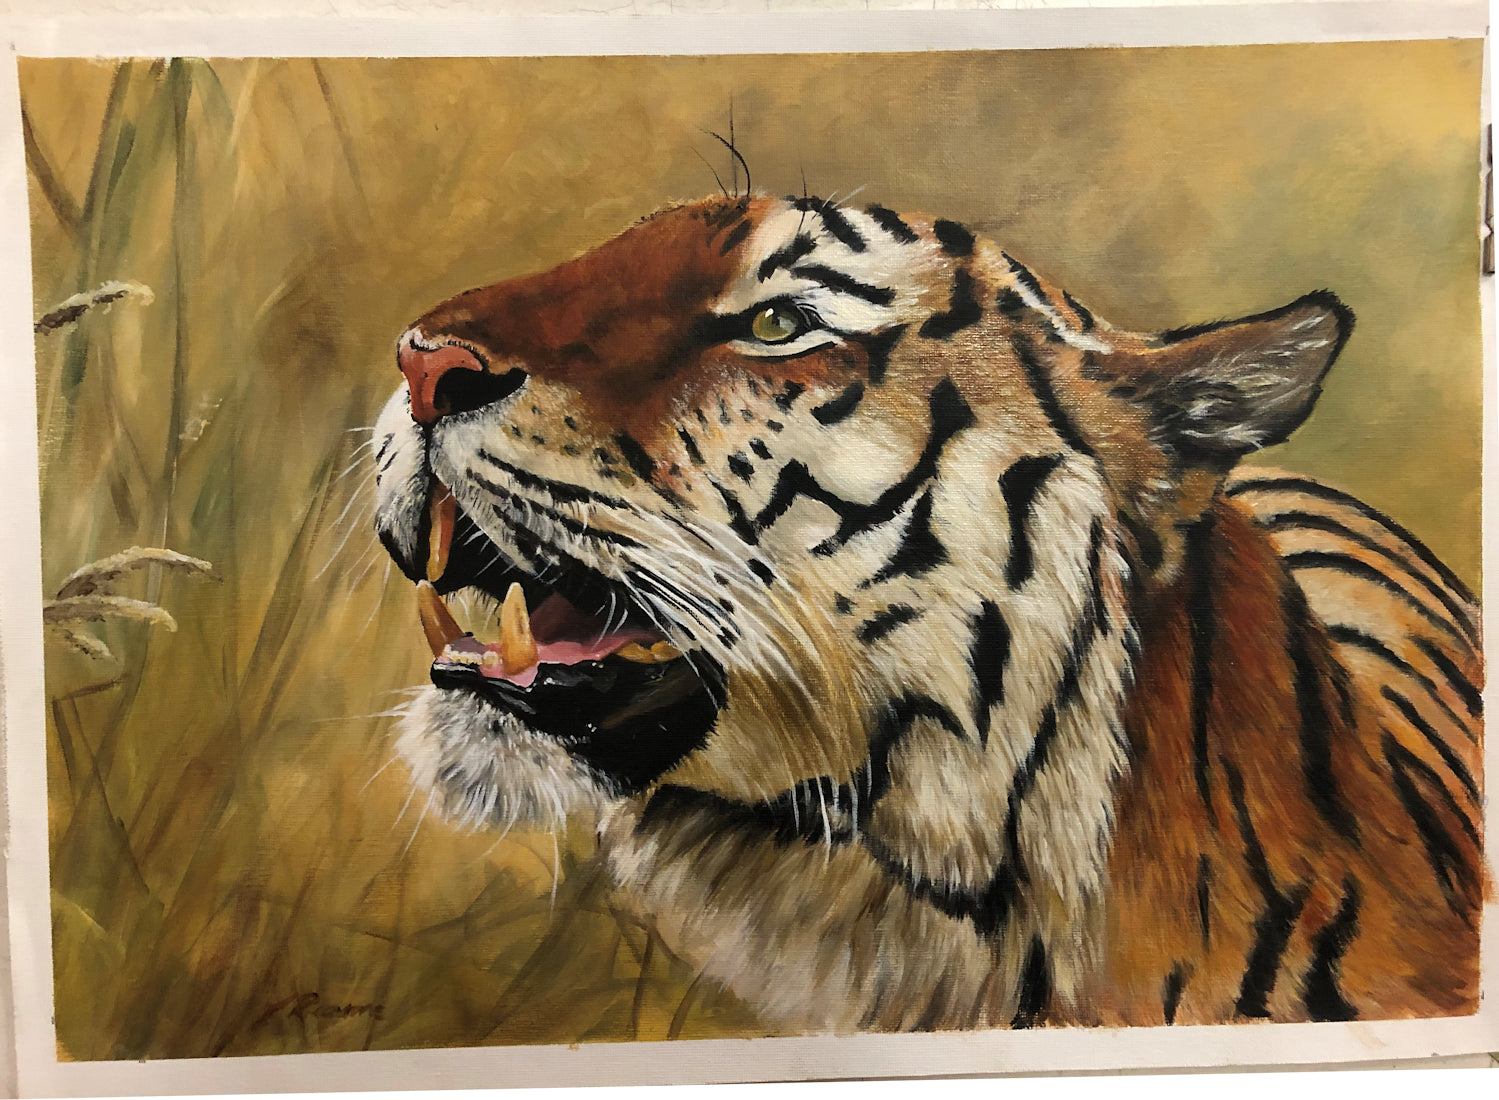 The Tiger: Mixed Media: Original Acrylic & Oil, Signed by the Artist: Elaine Reaume